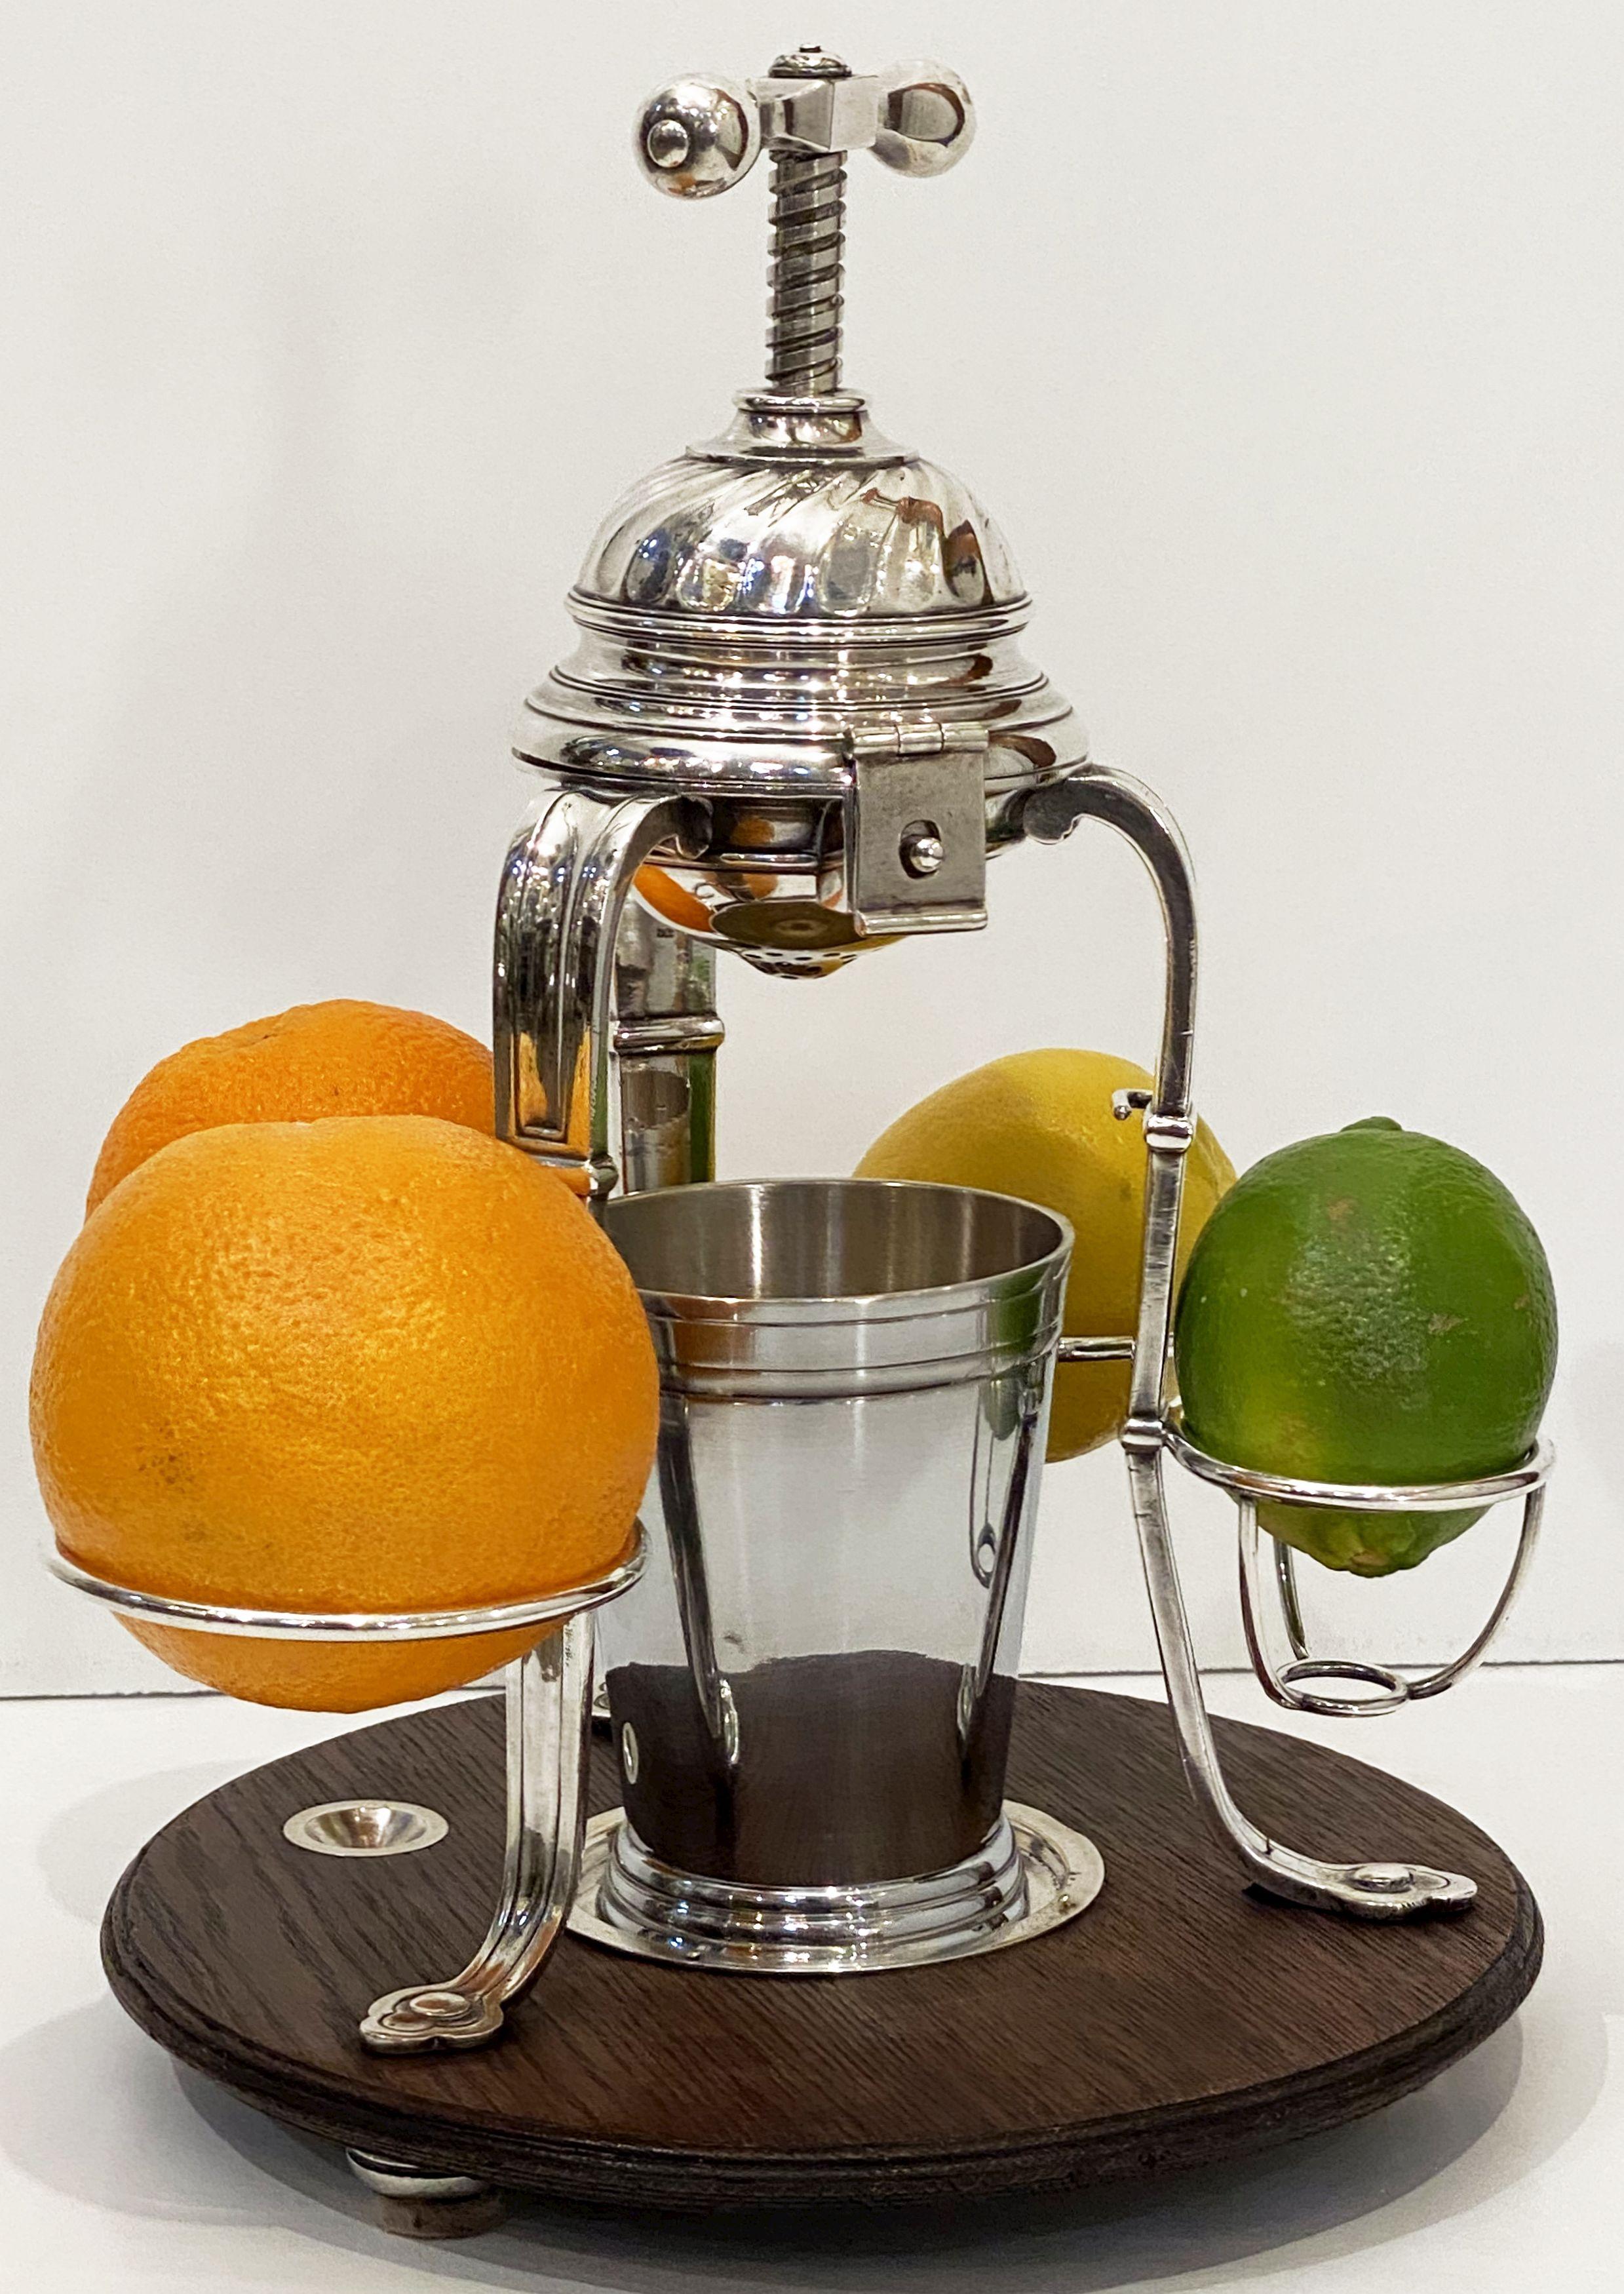 A fine lemon squeeze or citrus juicer from Corsica, featuring a plate silver apparatus with handle and squeeze mounted to a wood base, with a removable tumbler or container for the collected juice.